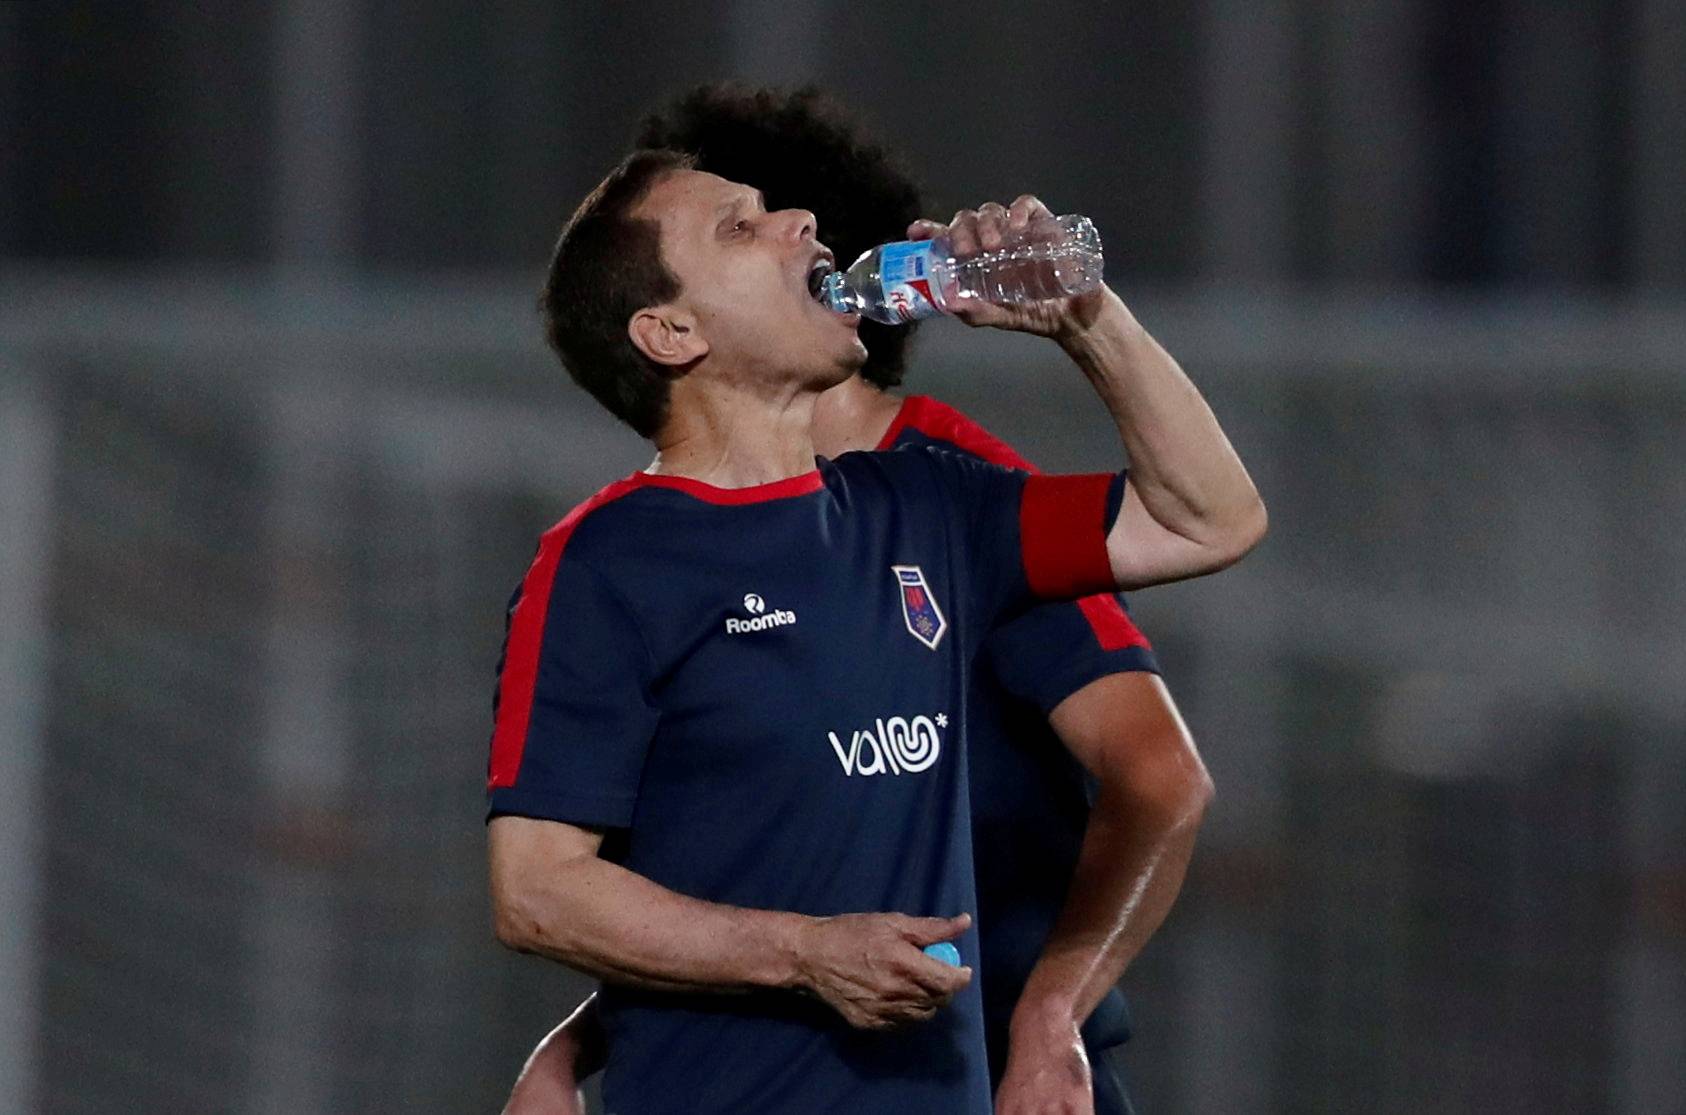 Ezzeldin Bahader, a 74-years-old Egyptian football player of 6th October Club drinks water during a soccer match against El Ayat Sports Club of Egypt's third division league at the Olympic Stadium in the Cairo suburb of Maadi